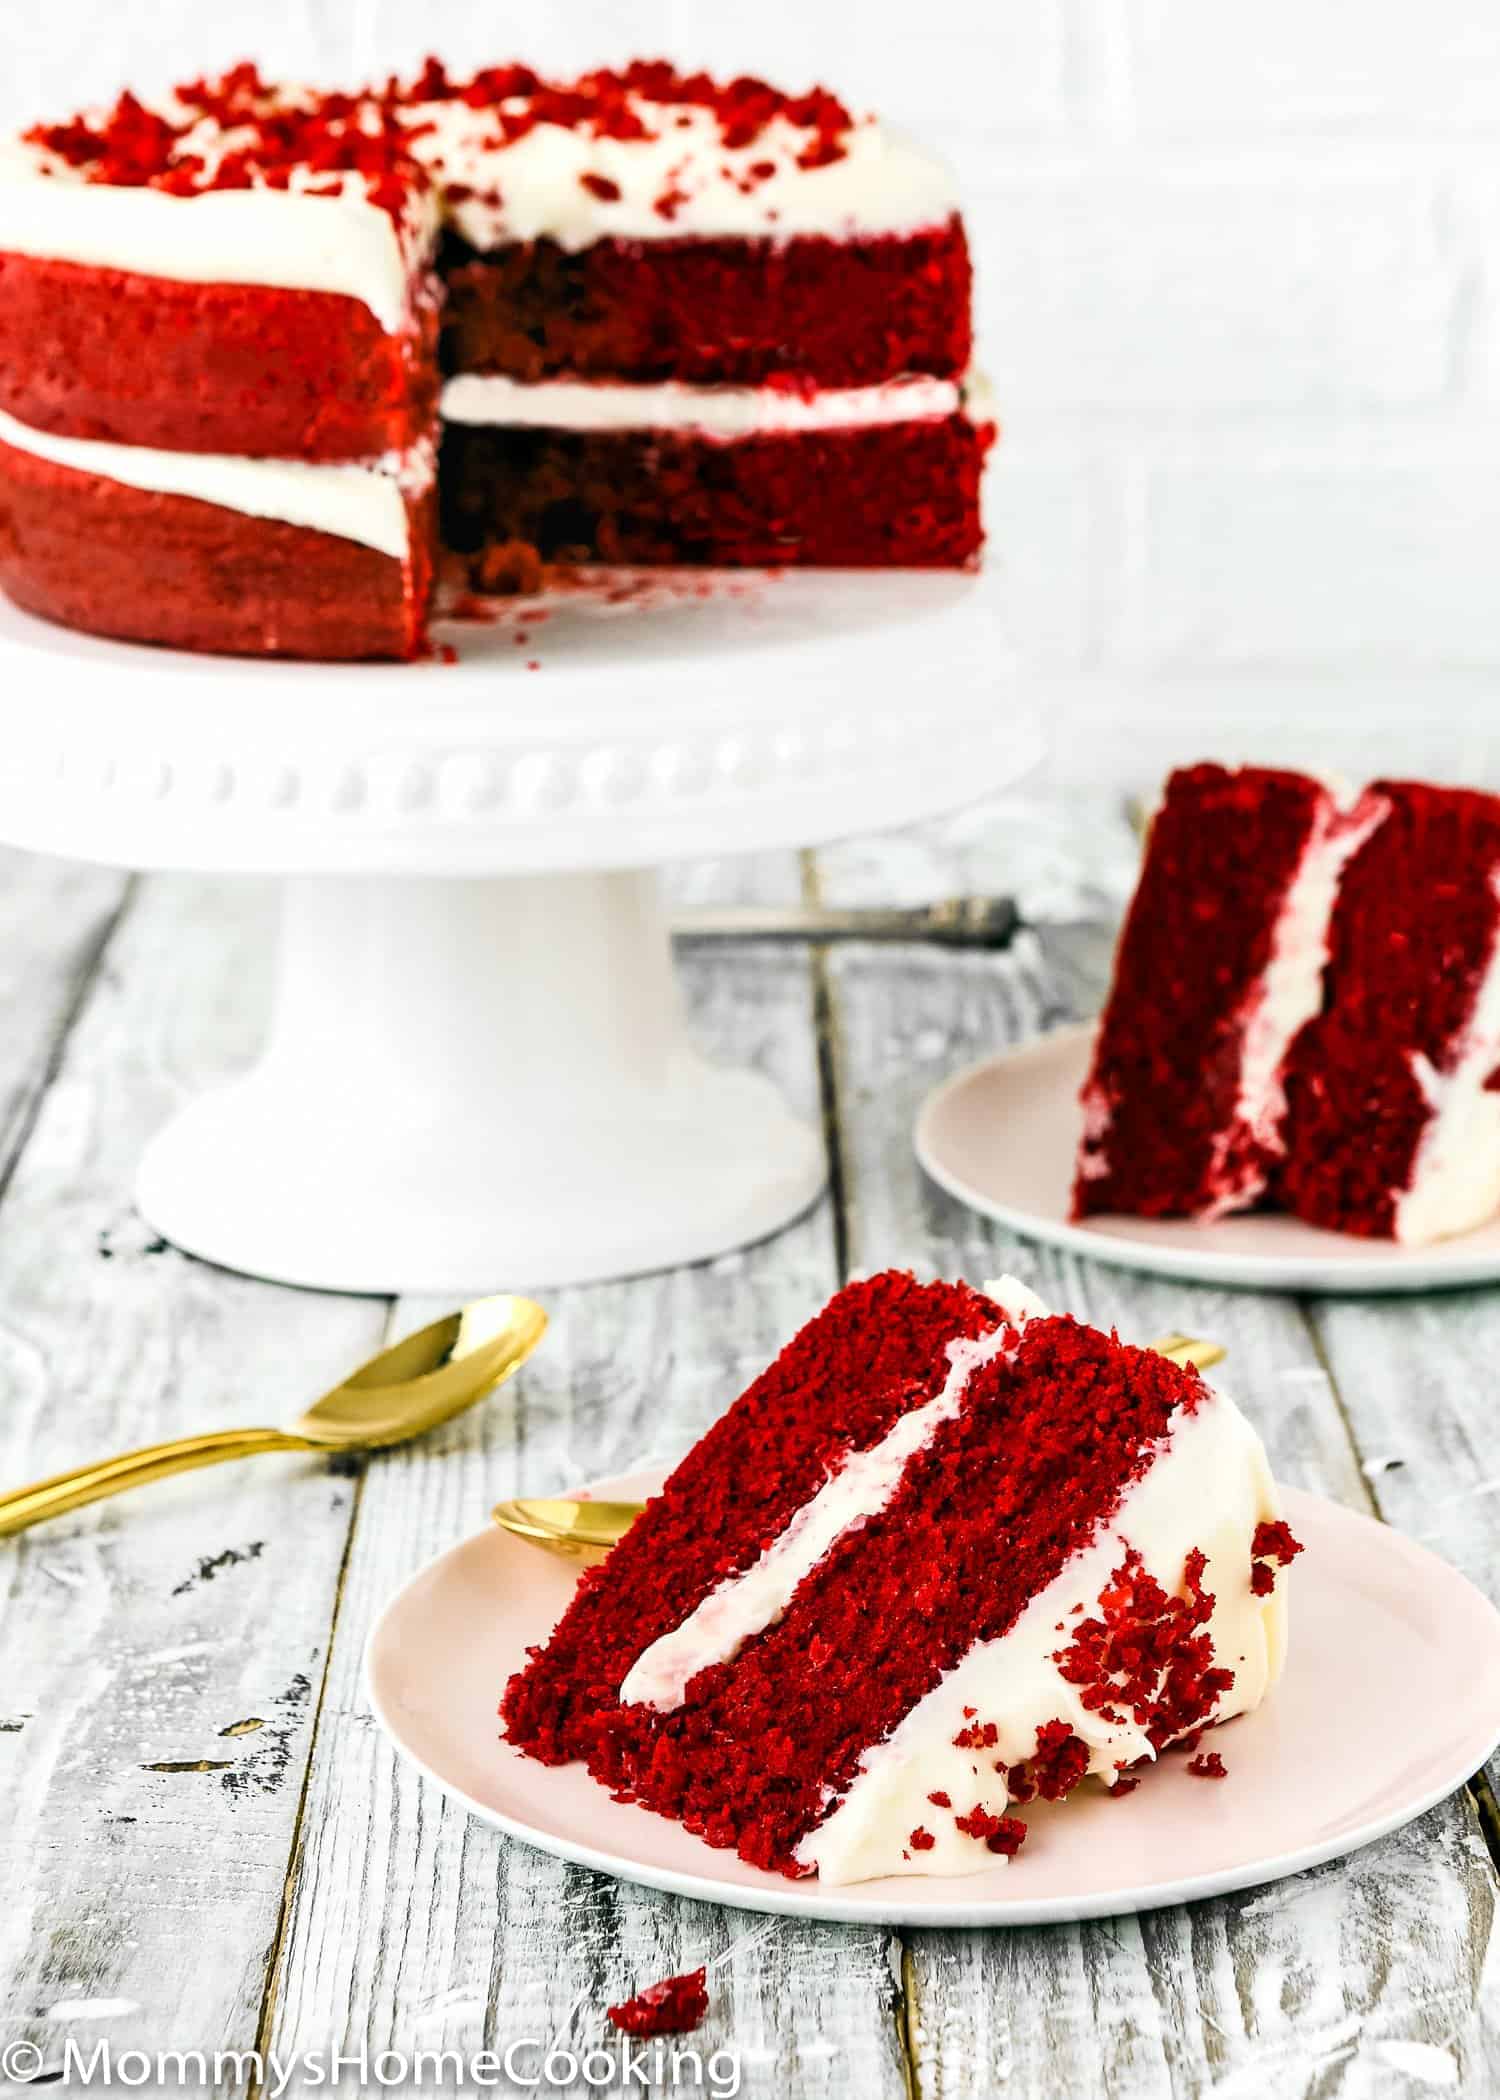 Eggless red velvet cake on a cake stand with a slice cut out, served on a plate.